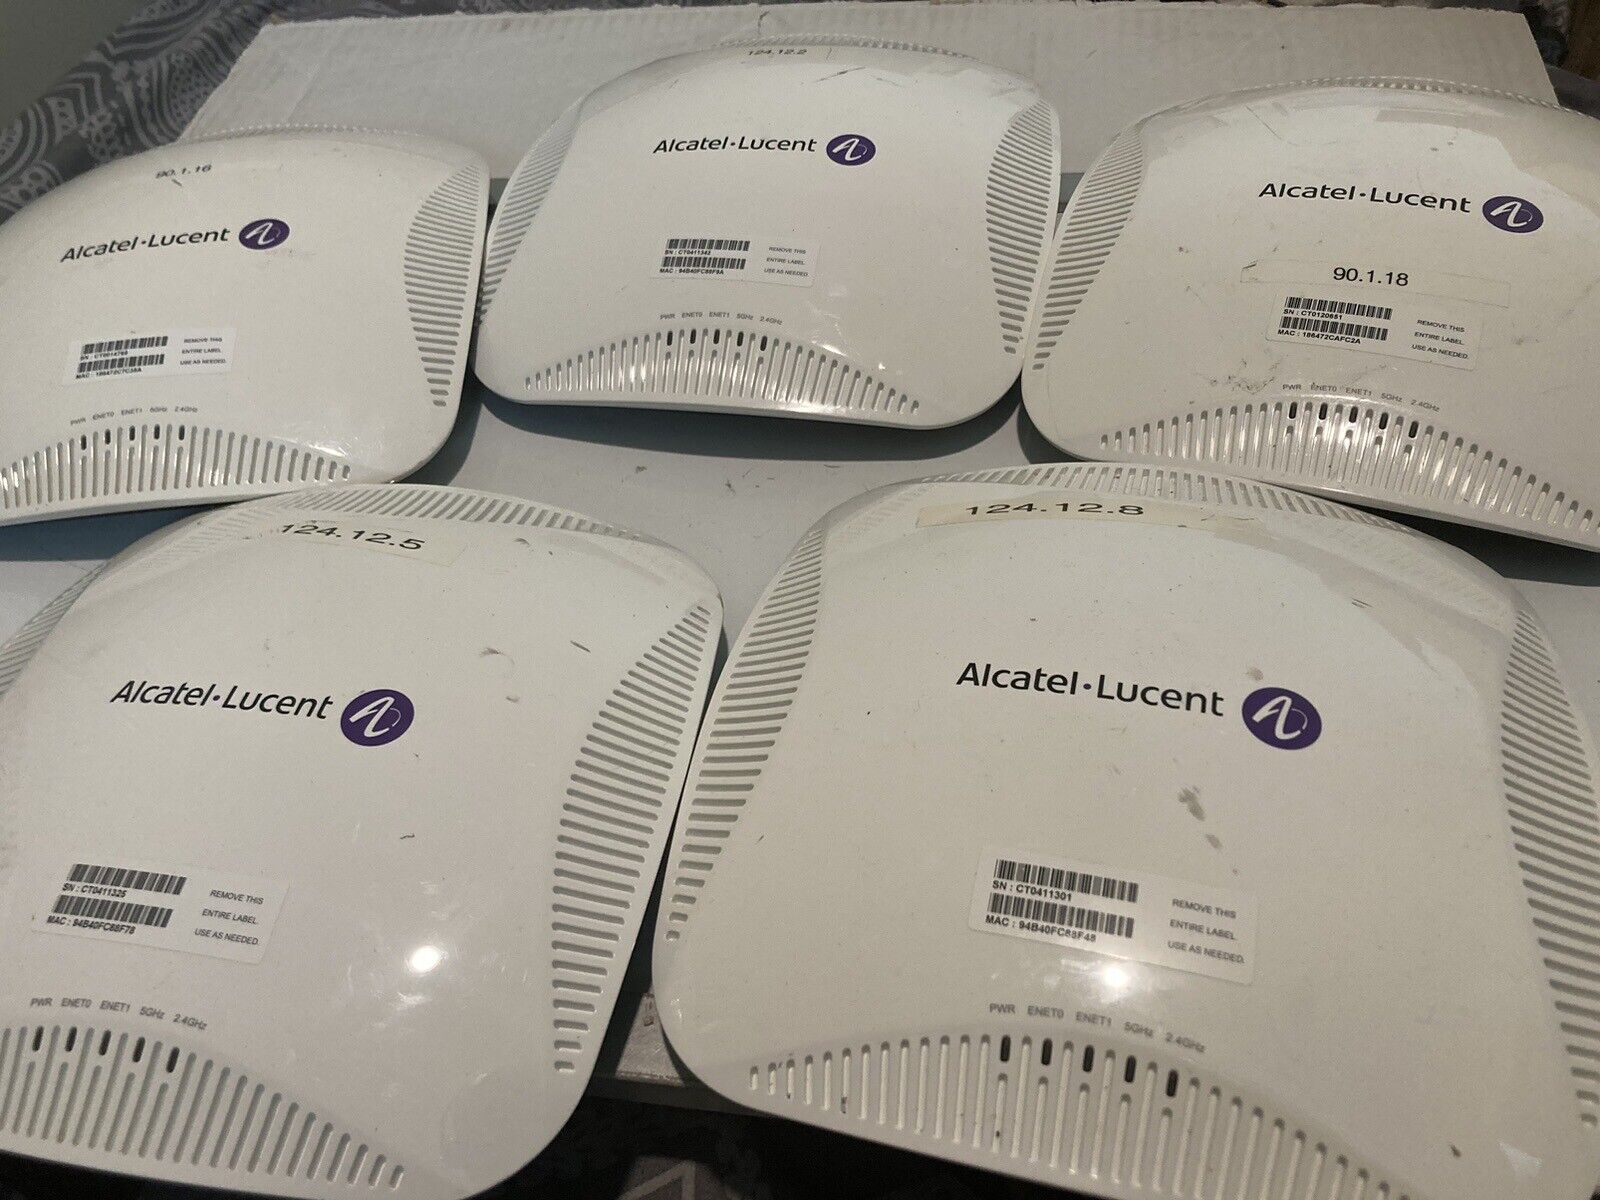 Lot of 10 Aruba/Alcatel-Lucent AP-225 1300Mbps Wireless Access Point APIN0225